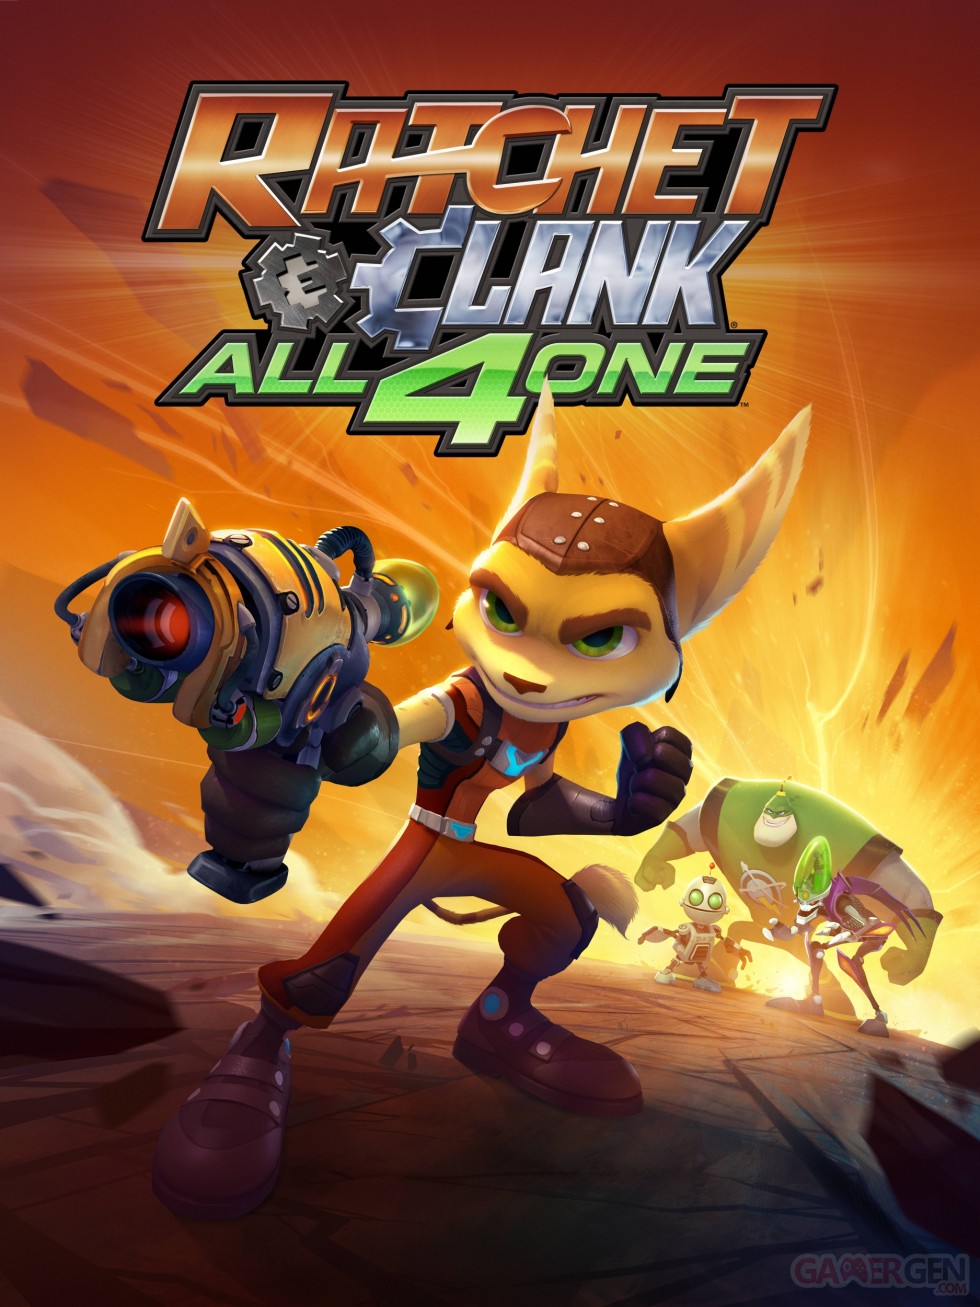 Ratchet-and-Clank-All-4-One-Artwork-13-04-2011-08